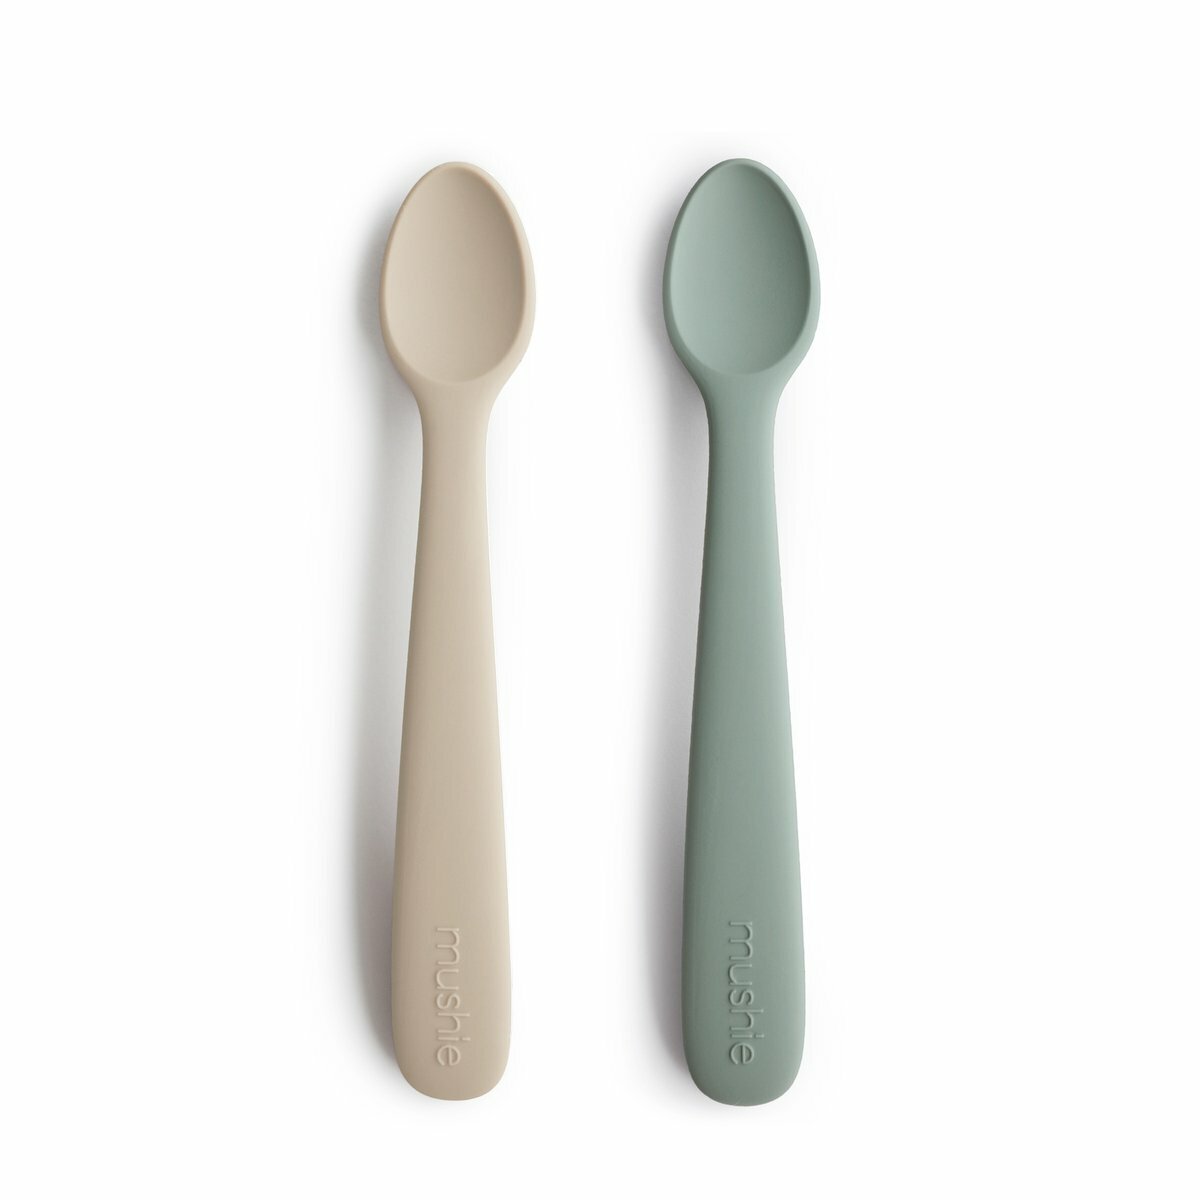 SpearmintLOVE’s baby 2-Pack Silicone Feeding Spoons, Cambridge Blue/Shifting Sand